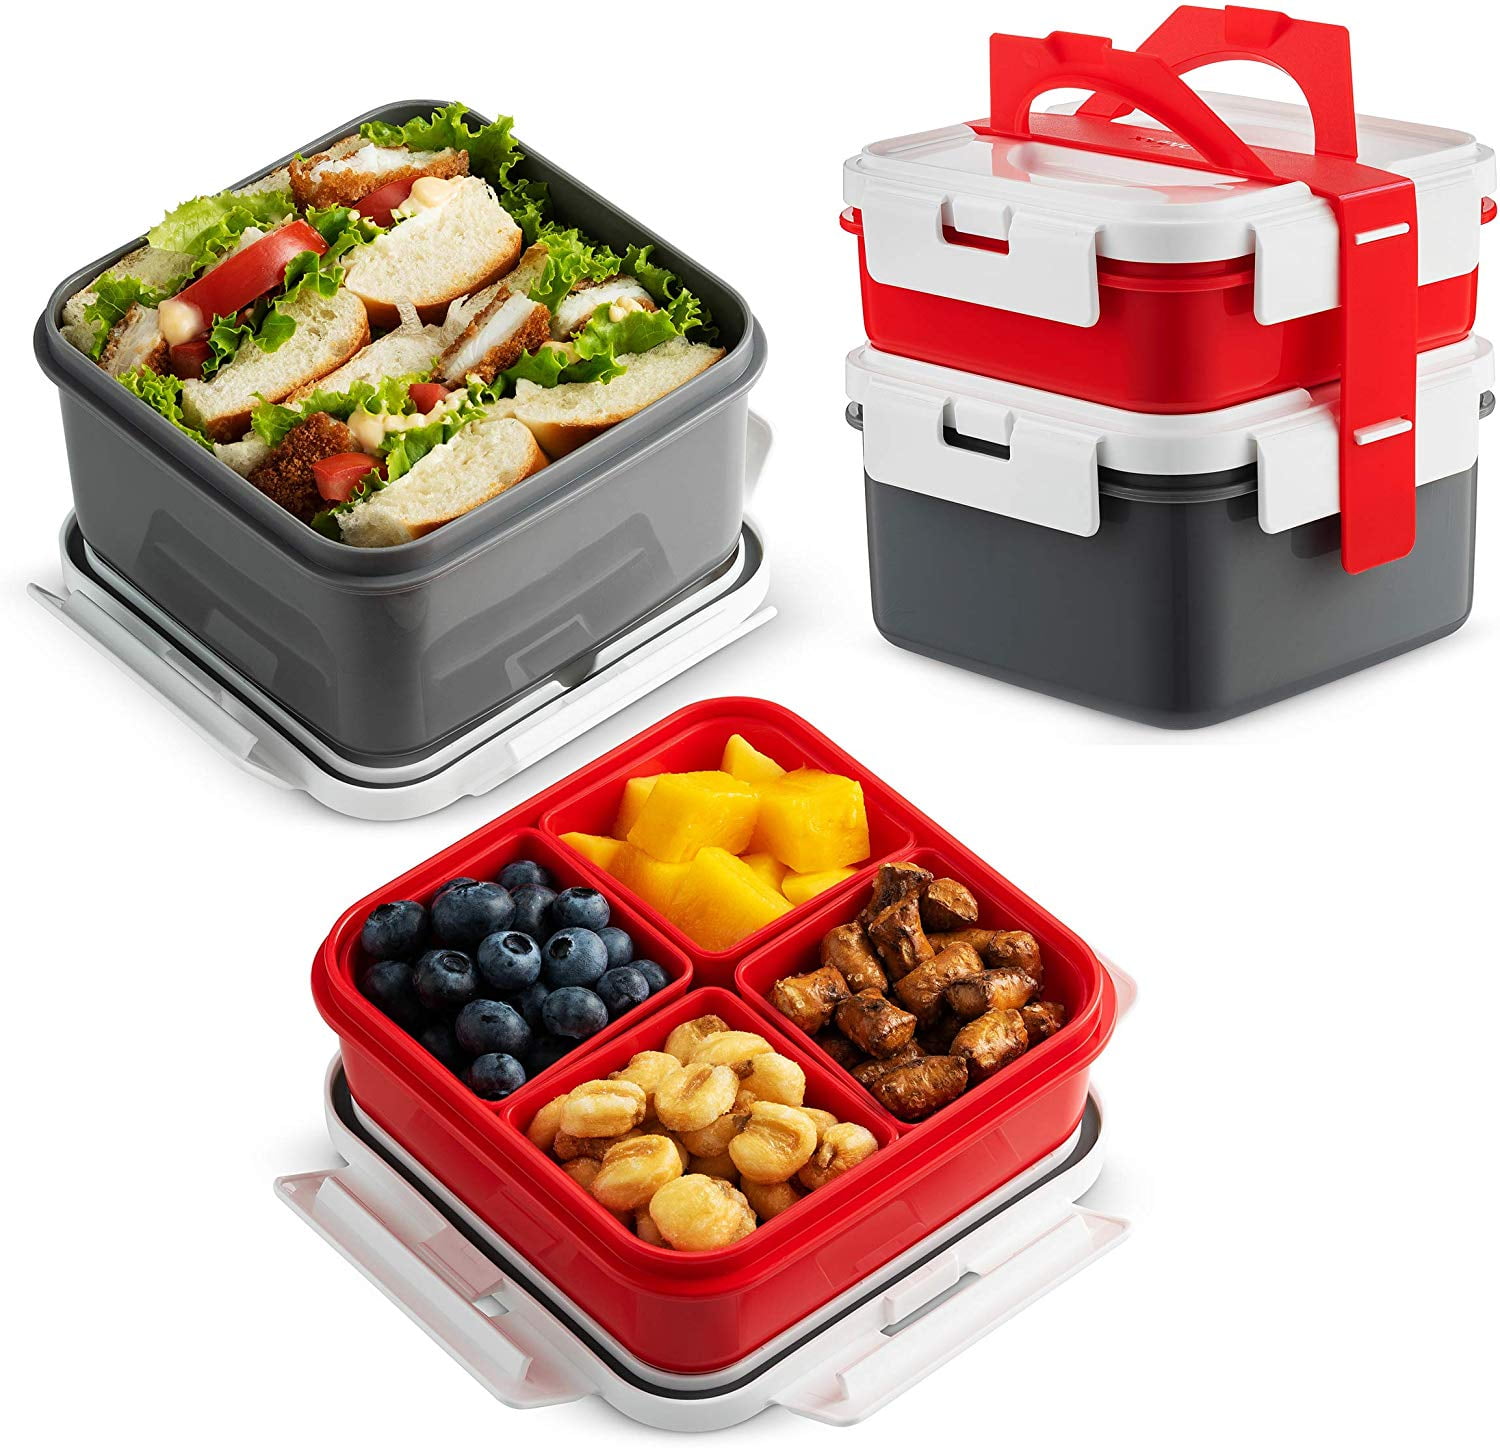 Buy Komax Bento Lunch Box Containers With Strap Meal Prep Bento Box